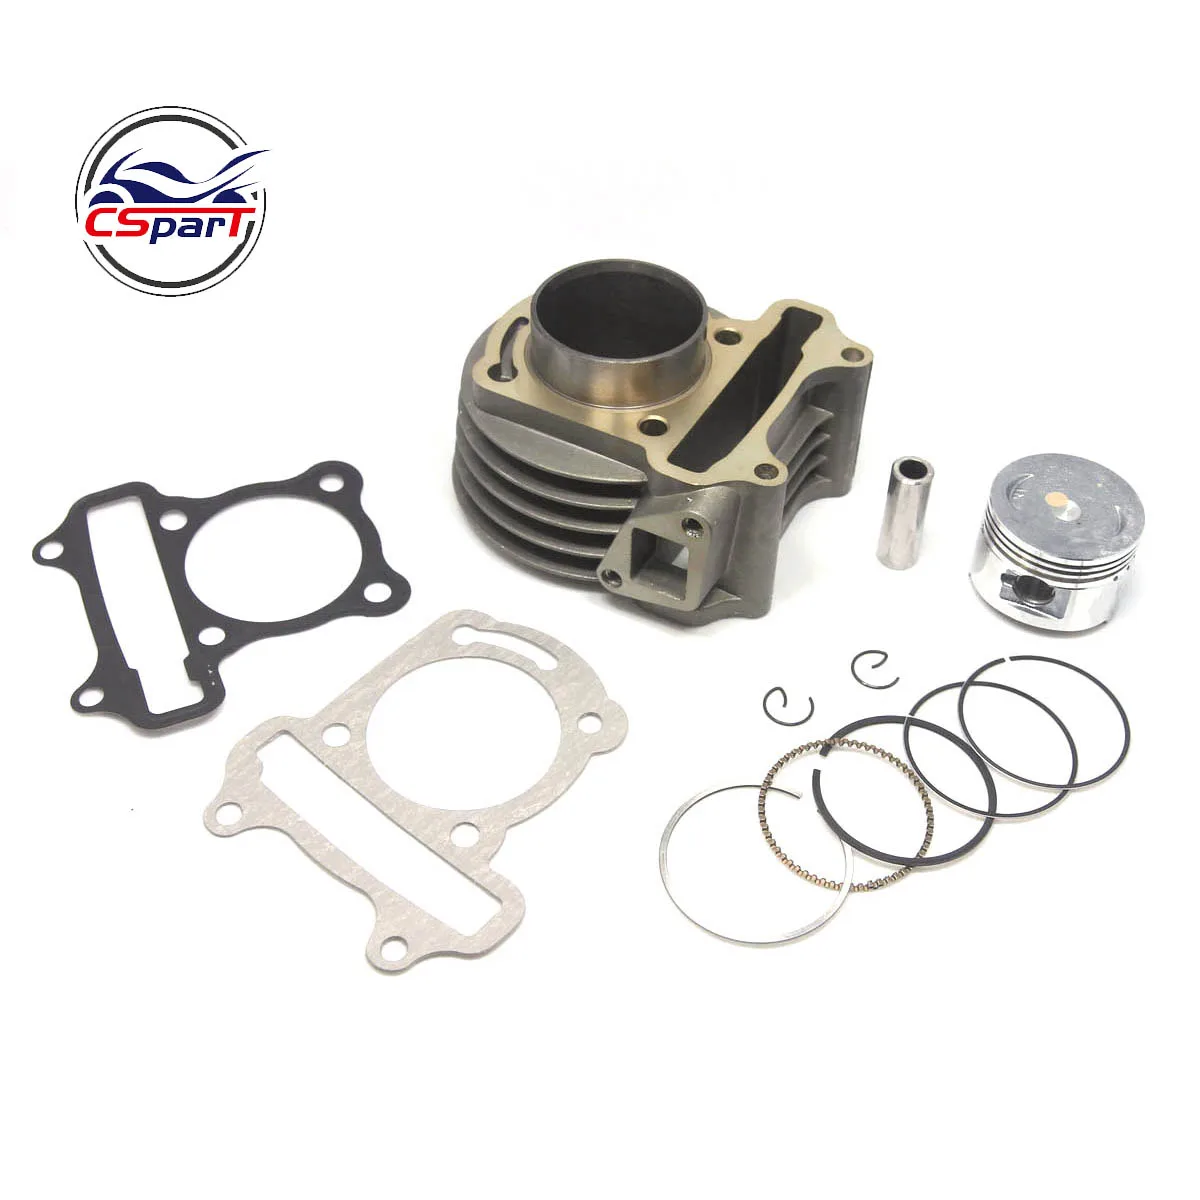 MYK Cylinder Kit 80cc 47mm Piston for GY6 139QMB engines ATV Scooter Moped Go Kart 